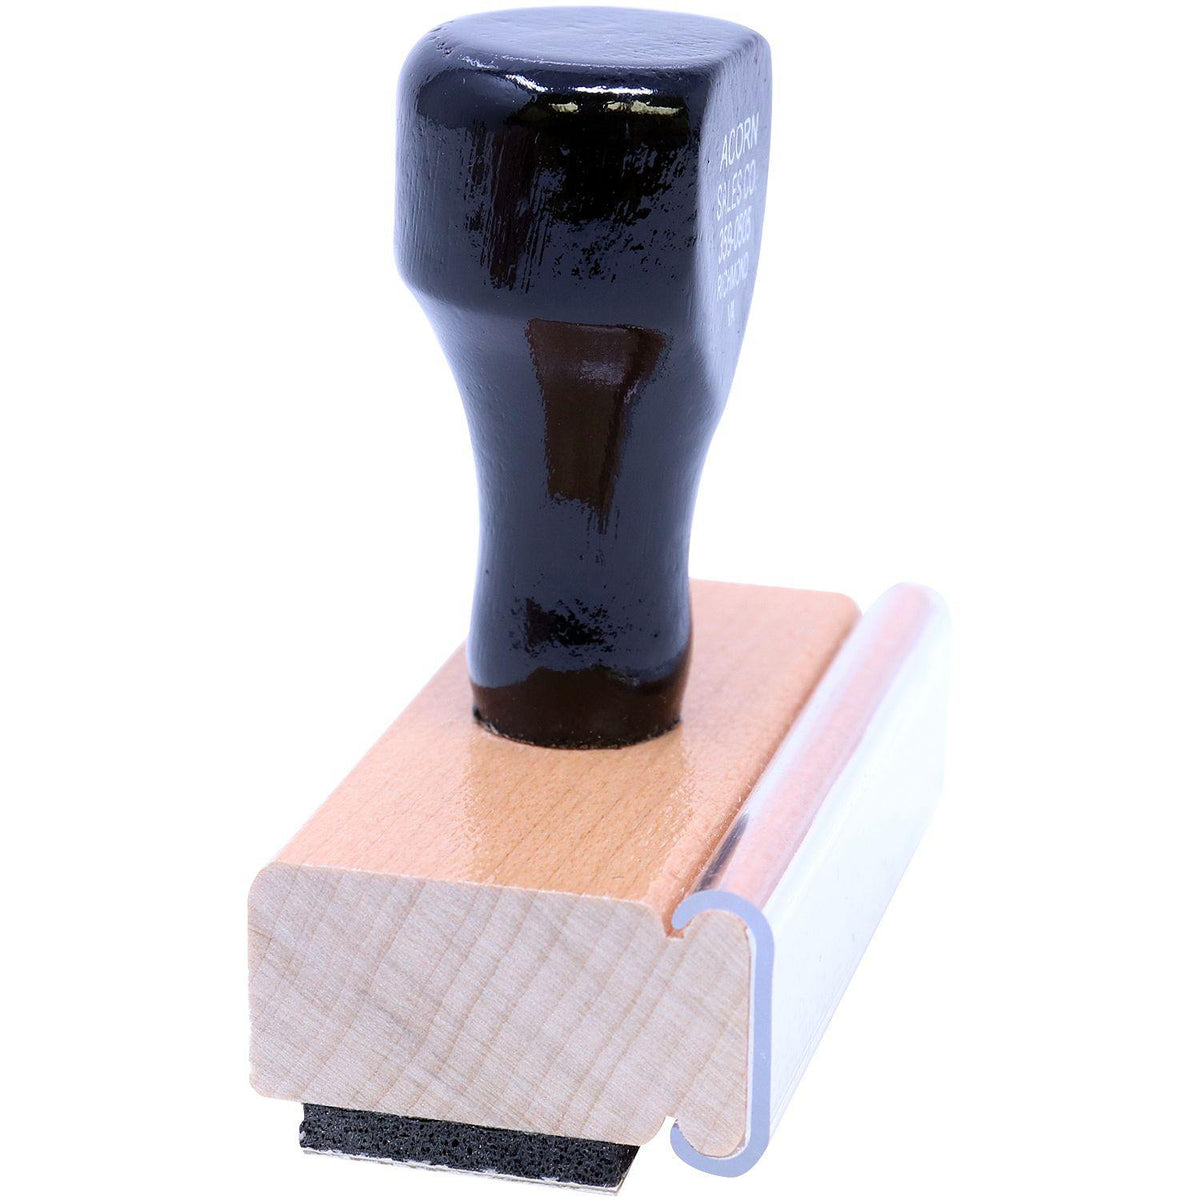 Medicade Rubber Stamp - Engineer Seal Stamps - Brand_Acorn, Impression Size_Small, Stamp Type_Regular Stamp, Type of Use_Medical Office